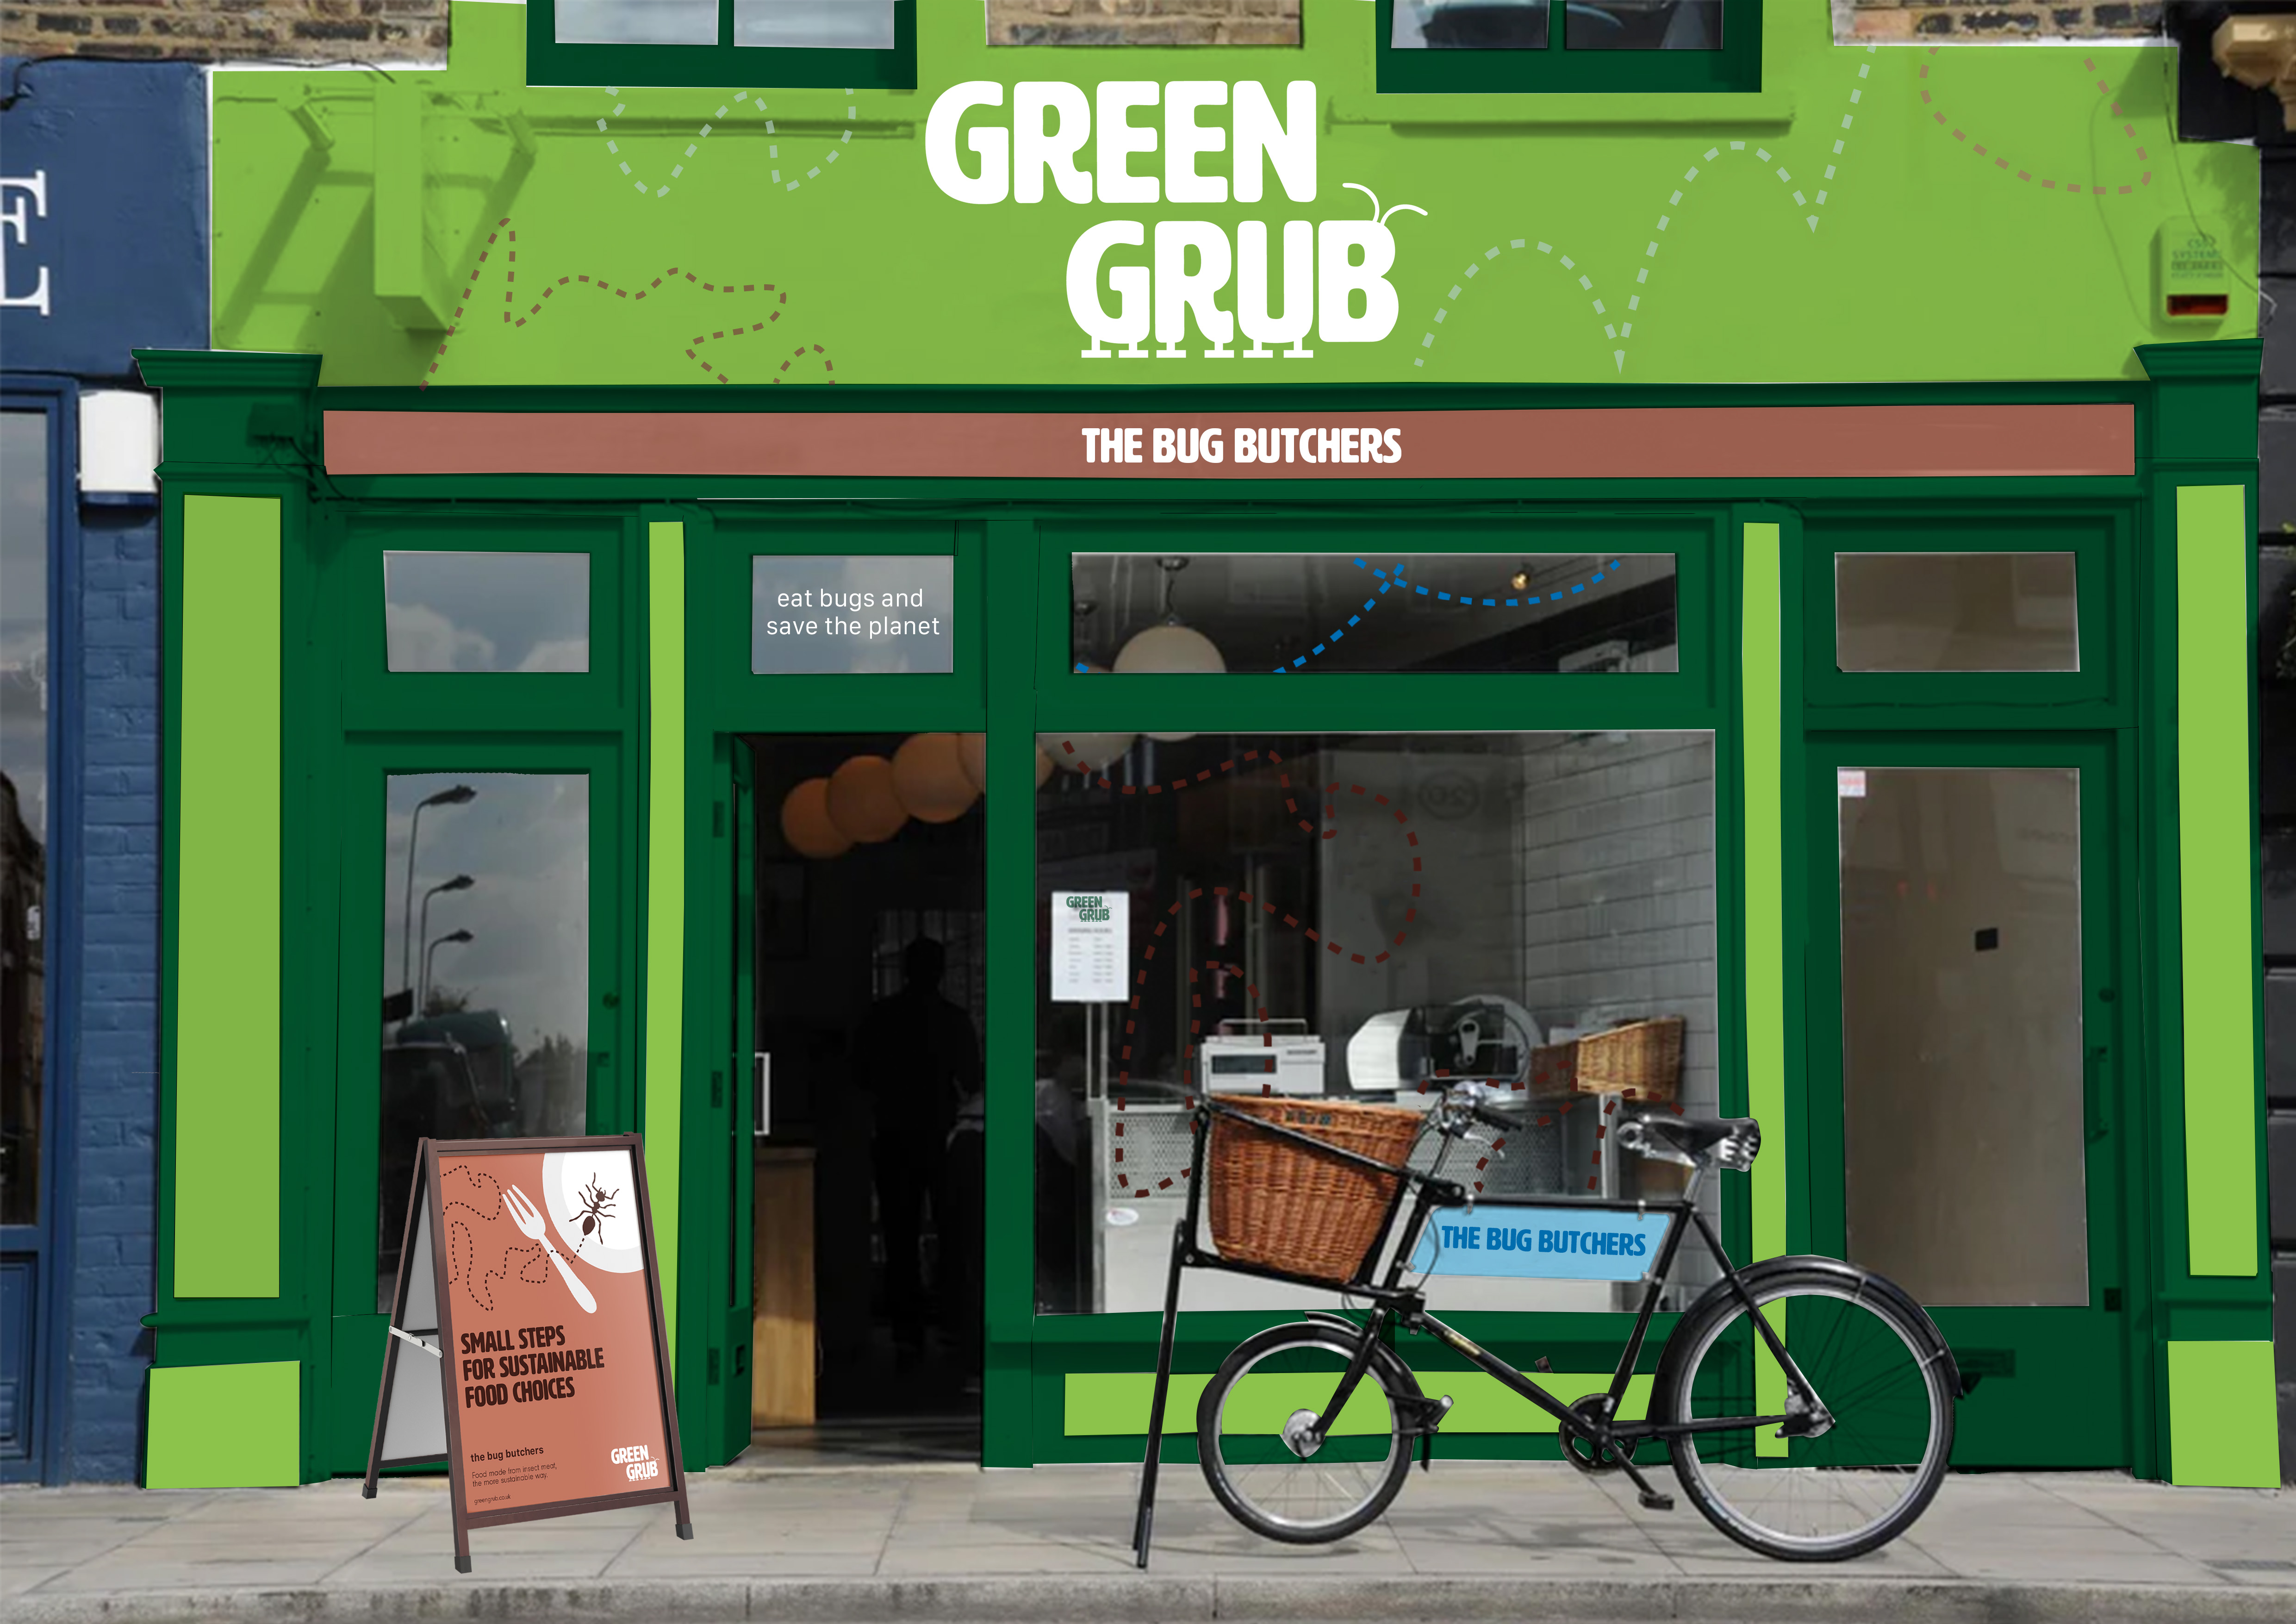 Green Shop design with 'Green Grub' shop name in white by Lauren Kerr showing the bright friendly identity